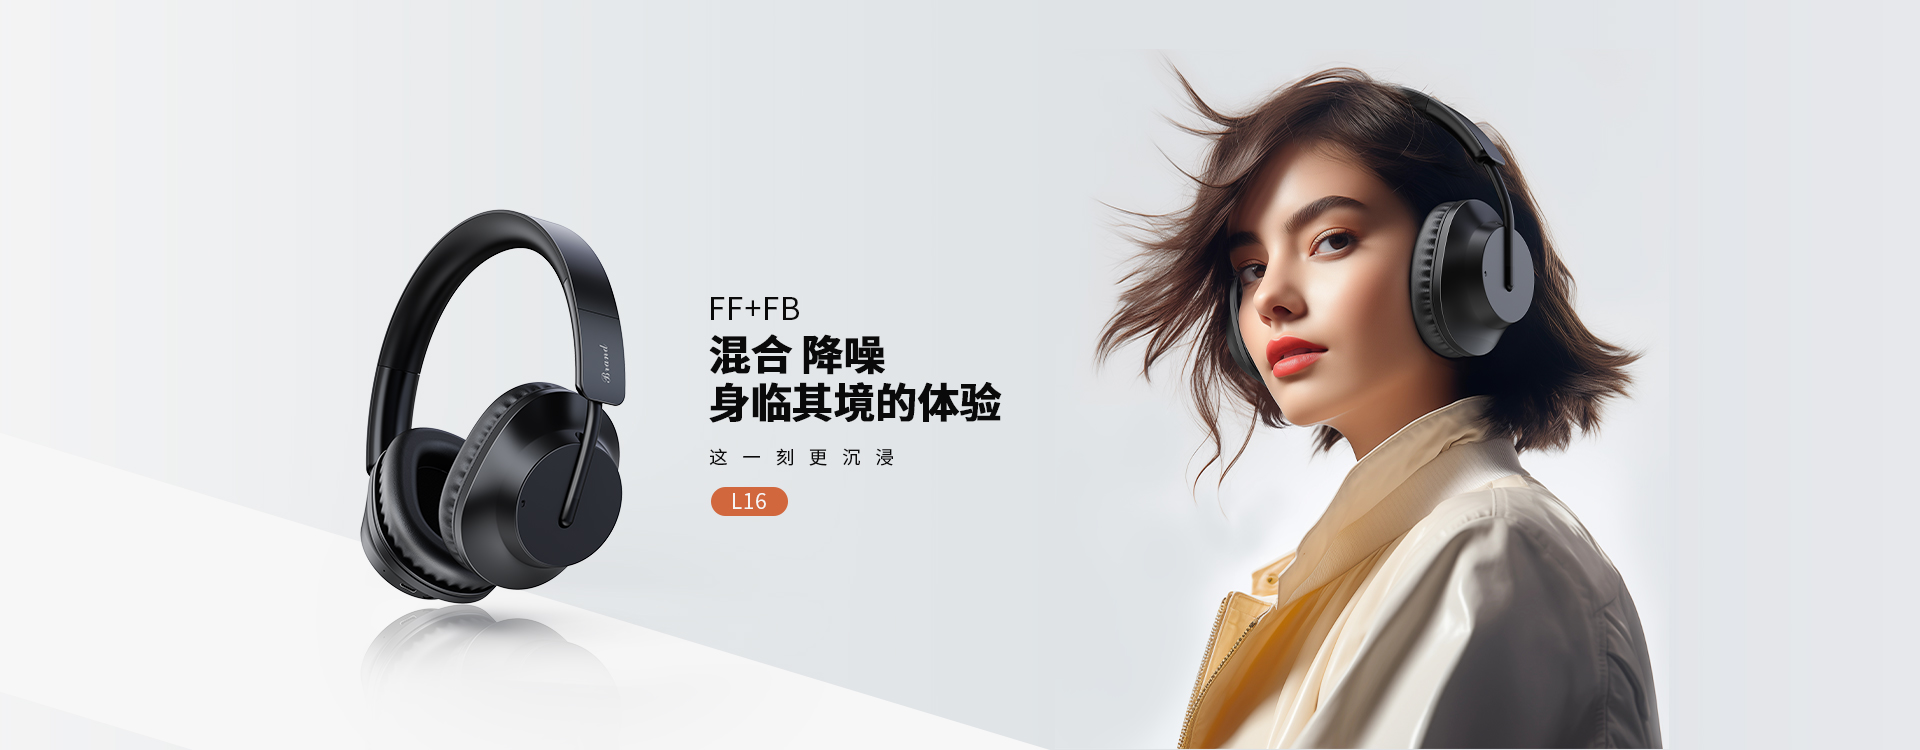 China best Active noise cancelling headphones 